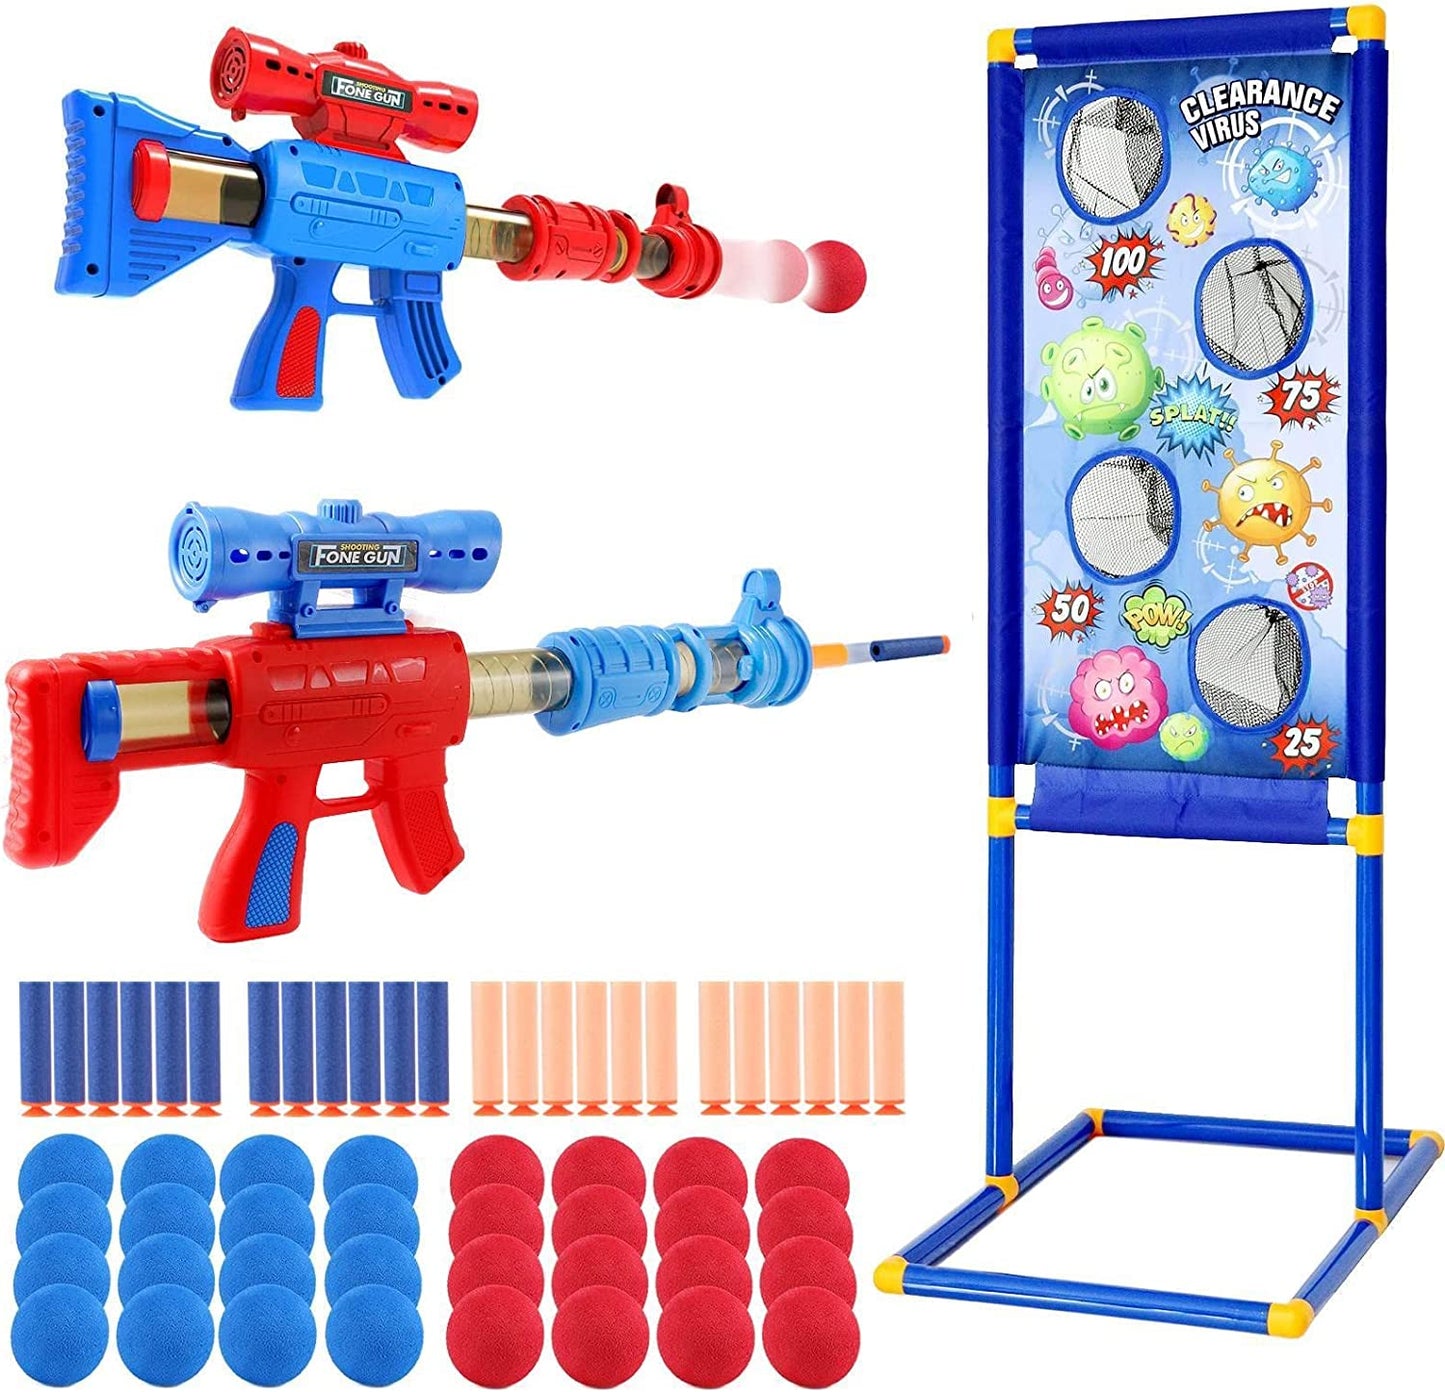 Kids Outdoor Toys for 5+ Year Old Boys: Shooting Game Toy With Target Set for Age 5 6 7 8-12 Boy Girls Gifts - 2 Pack Cool Party Games Foam Ball Popper Shooter Outside Toys Family Fun Ideas